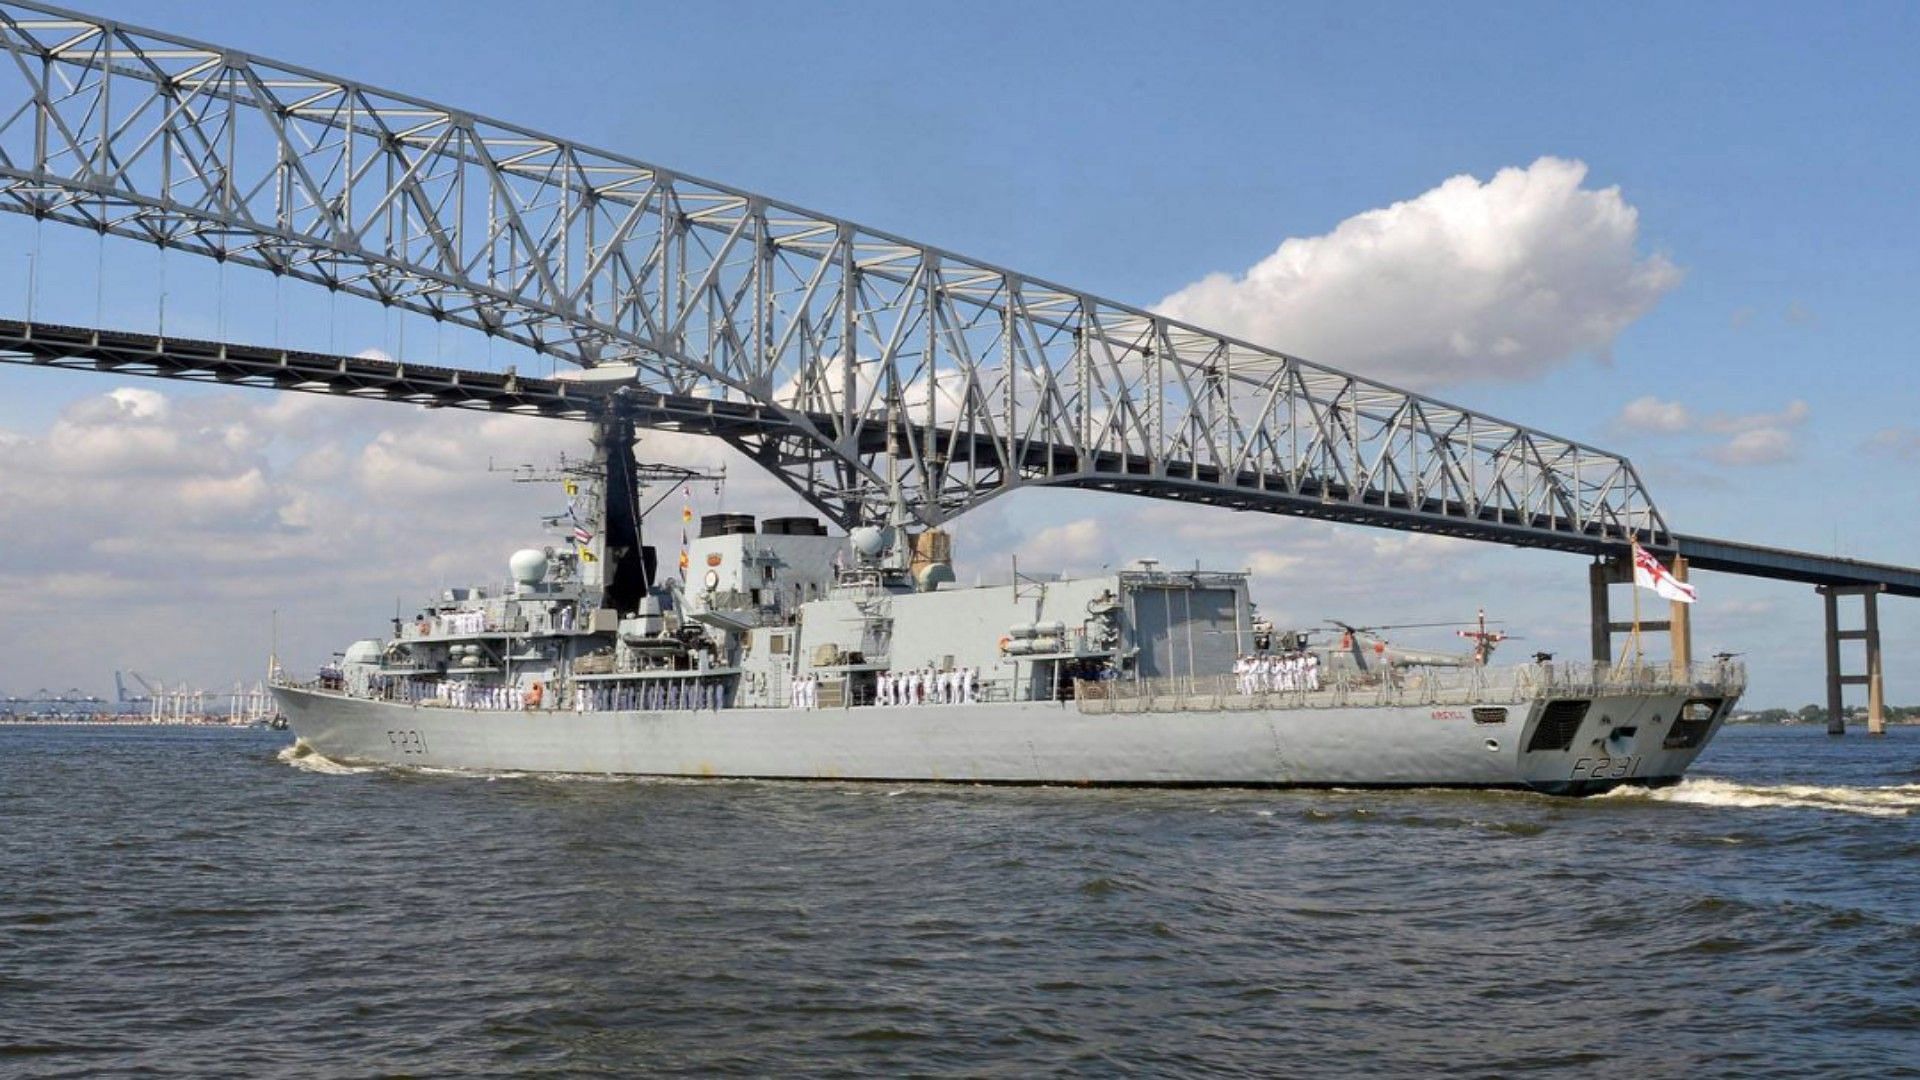 Francis Scott Bridge in Baltimore collapsed after ship collision (Image via Royal Navy/Facebook)